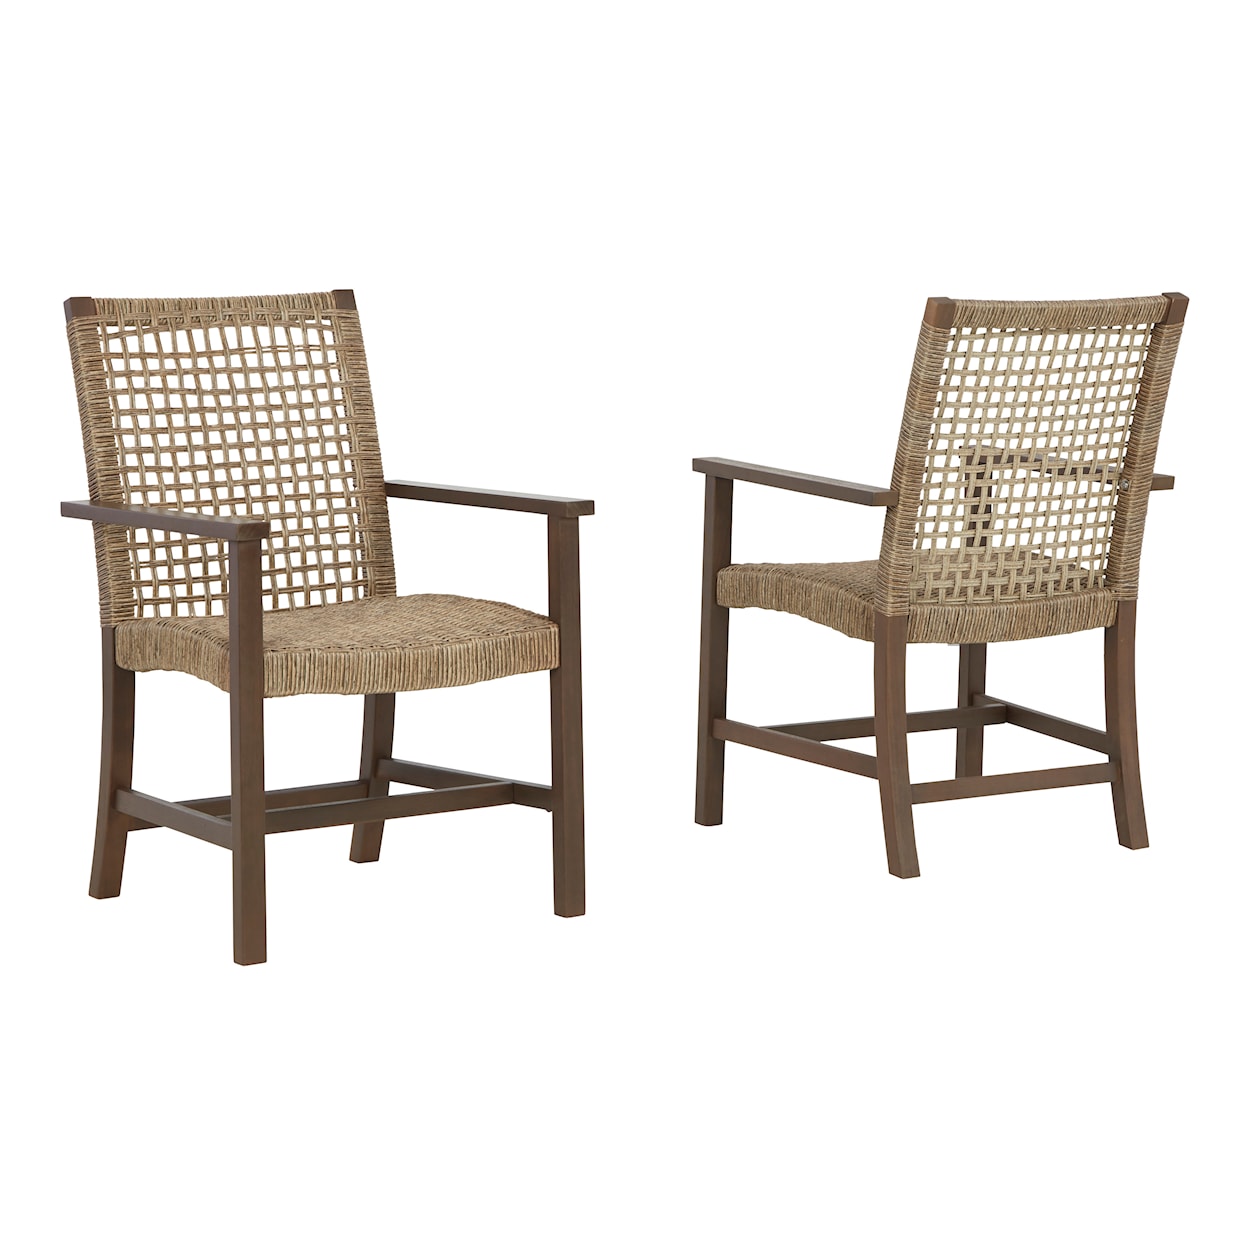 Signature Design Germalia Outdoor Dining Table and 2 Chairs